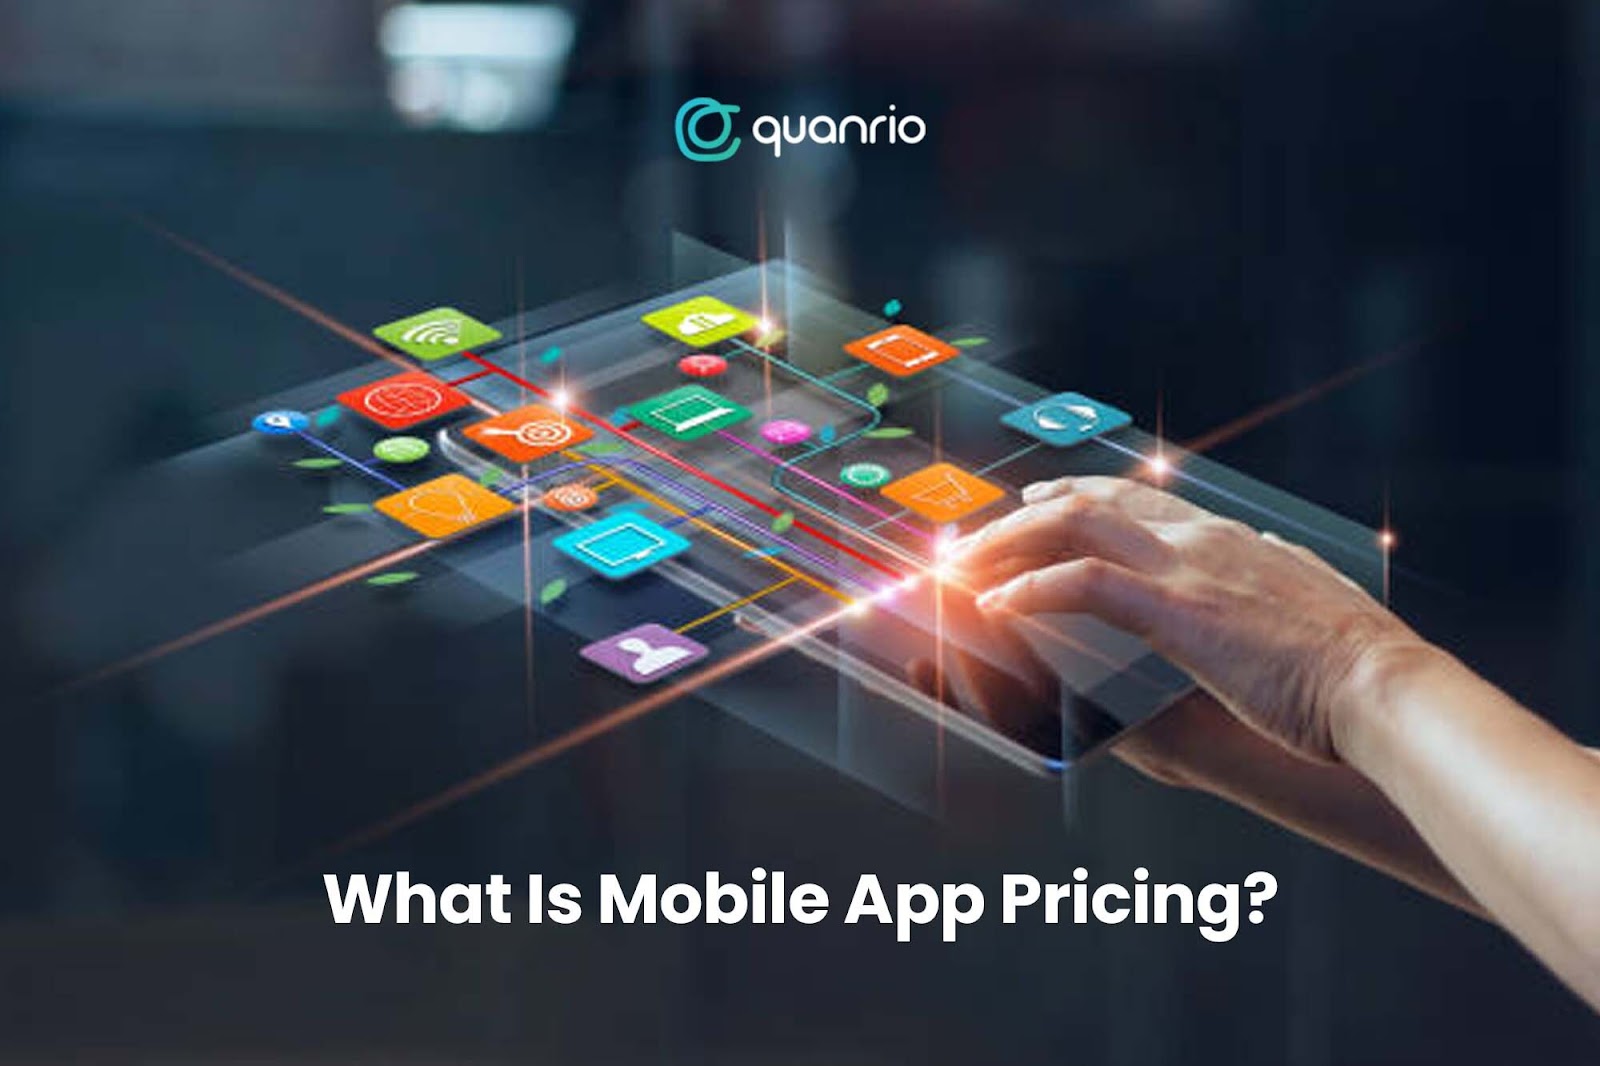 What is a Mobile App Pricing?